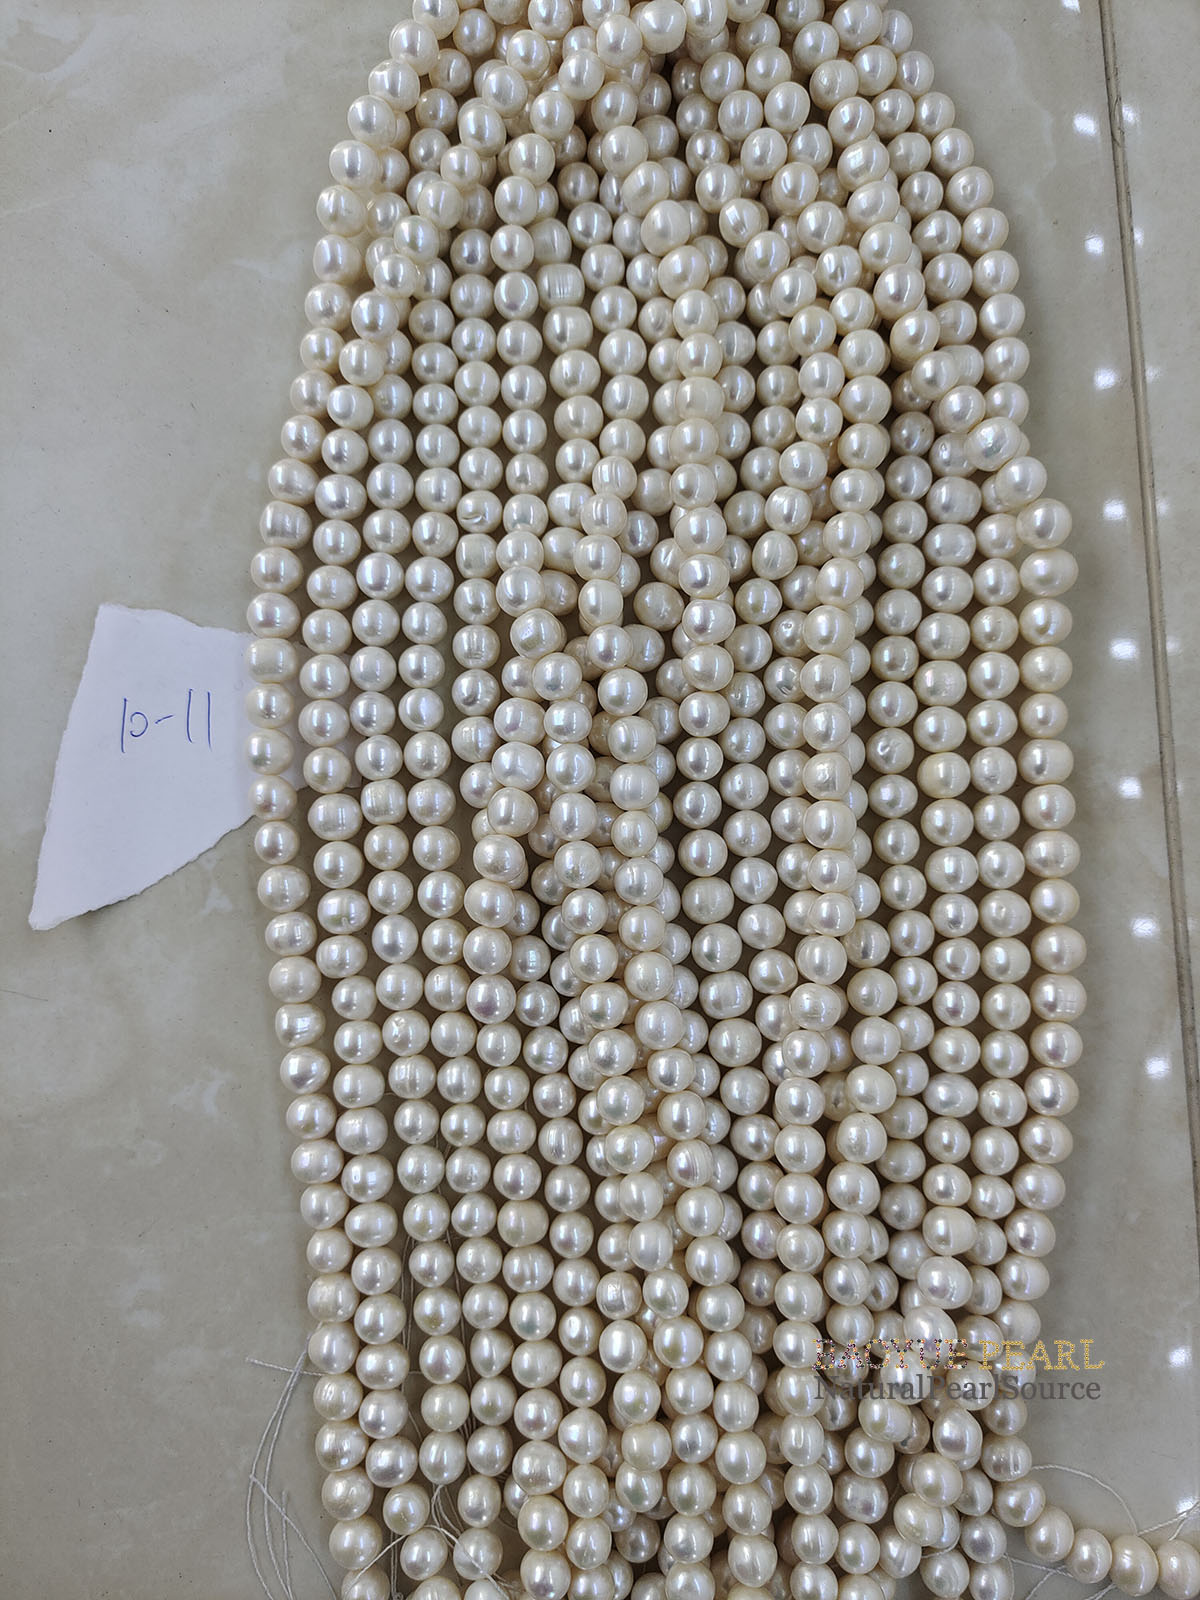 16 inch 3-12 mm Natural Pearls Wholesale good luster freshwater pearl in strand,egg shape wholesale loose freshwater pearl in strand